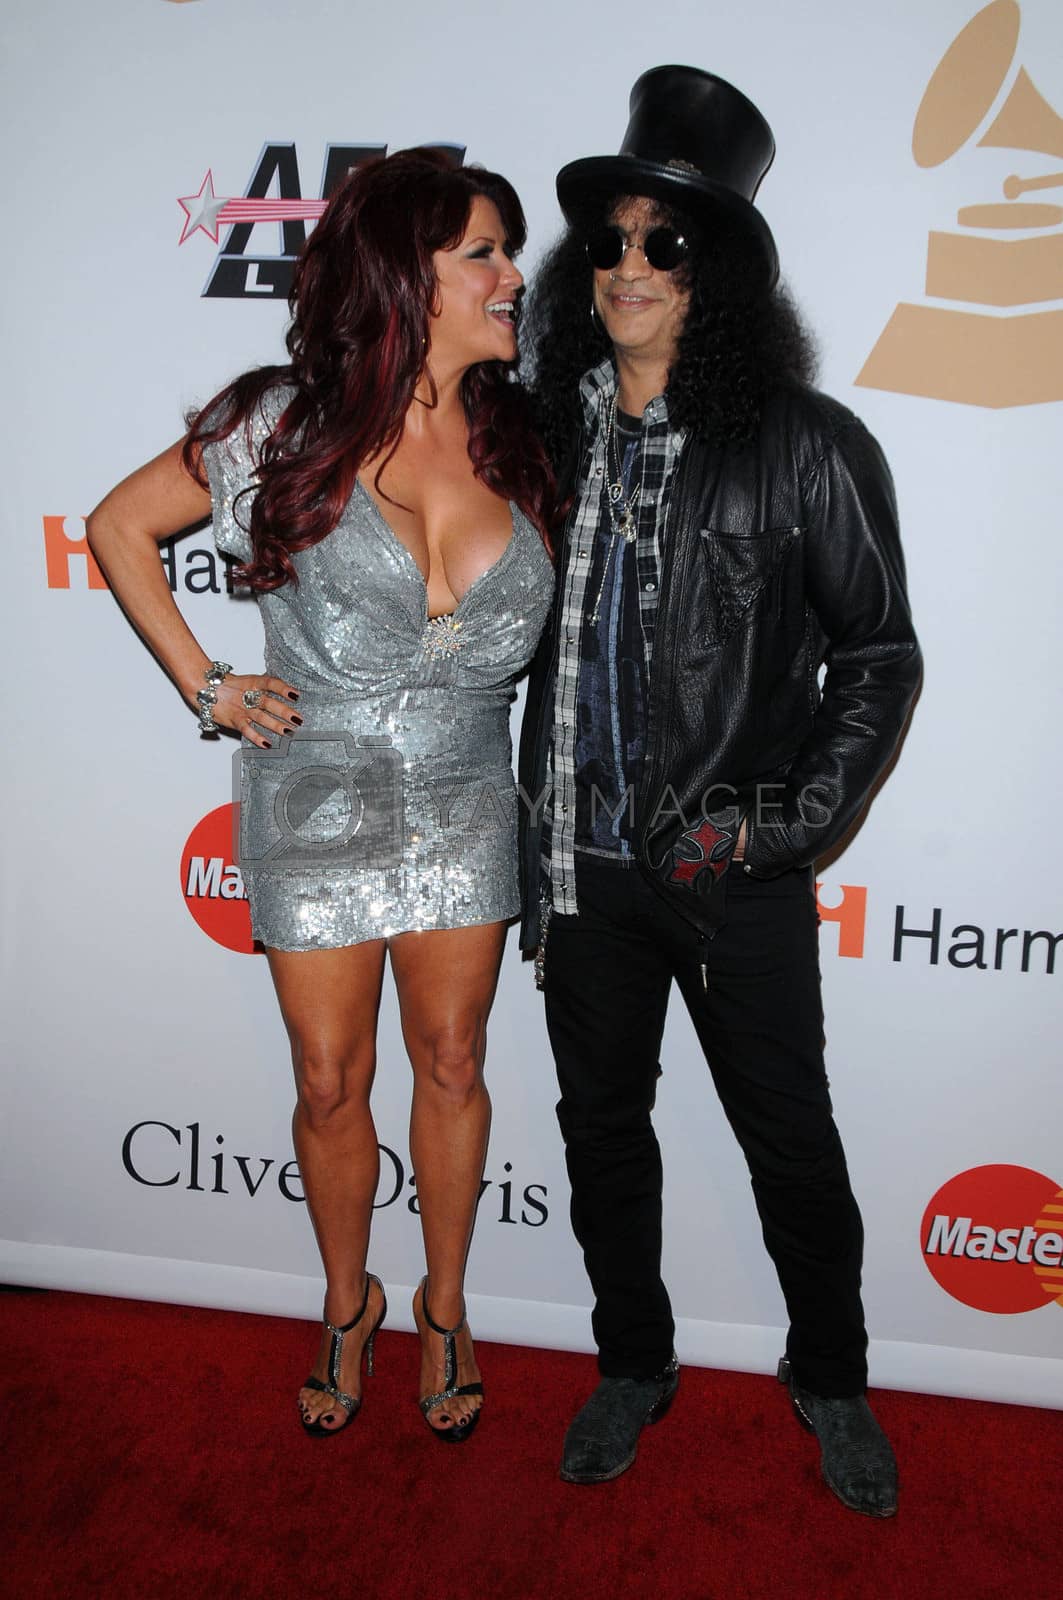 Royalty free image of Slash and Wife Perla
/ImageCollect by ImageCollect